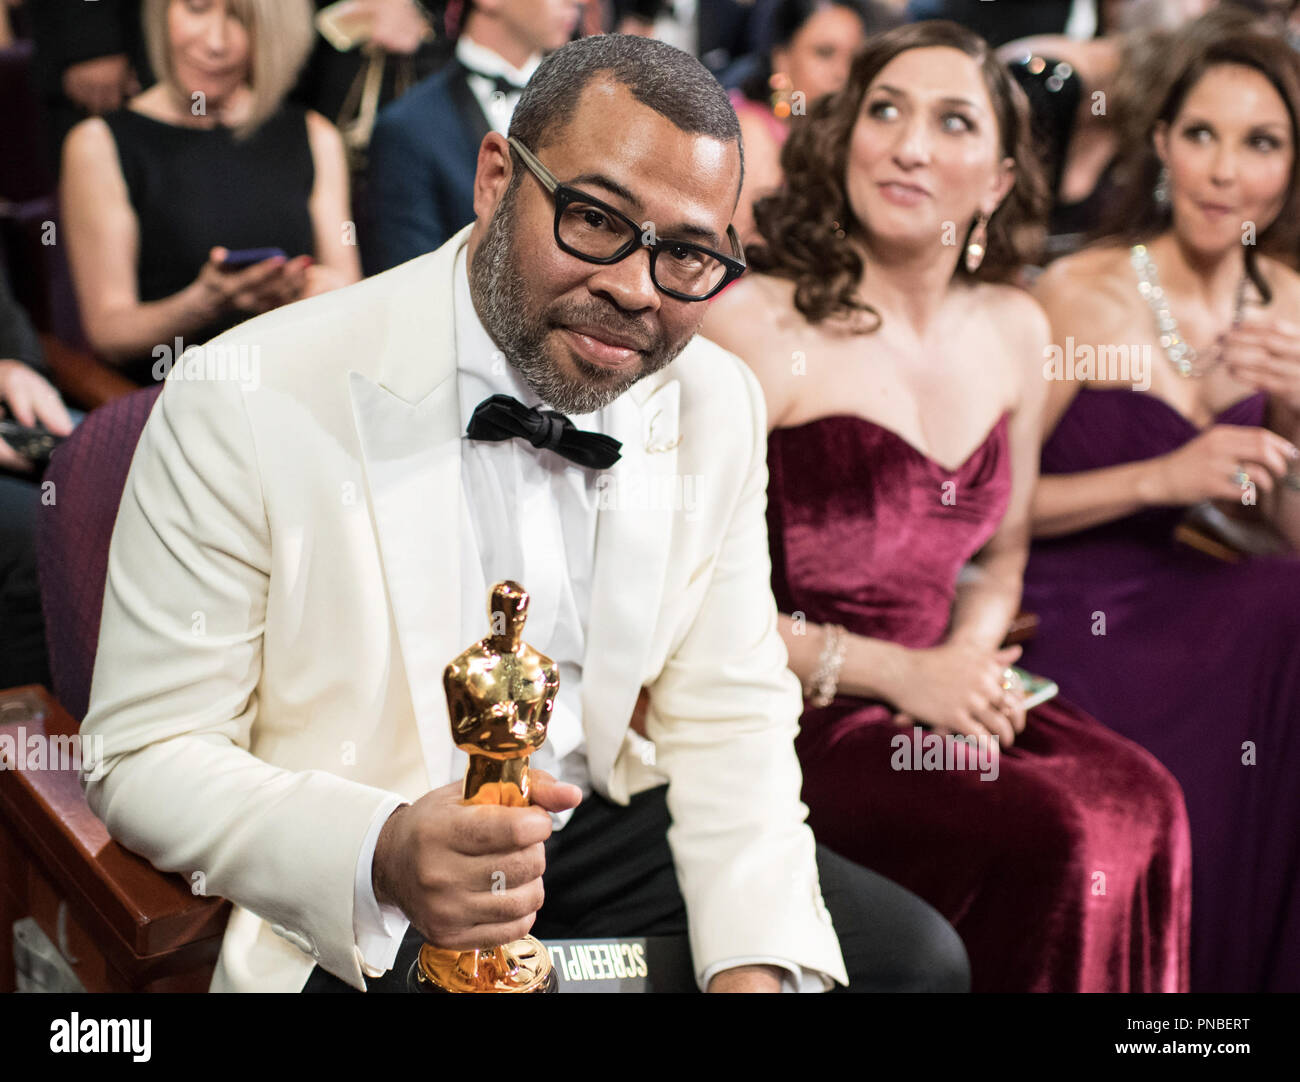 Oscar® winner for Original Screenplay, Jordan Peele, Chelsea Peretti and Ashley Judd at the 90th Oscars® at the Dolby® Theatre in Hollywood, CA on Sunday, March 4, 2018.  File Reference # 33546 566PLX  For Editorial Use Only -  All Rights Reserved Stock Photo